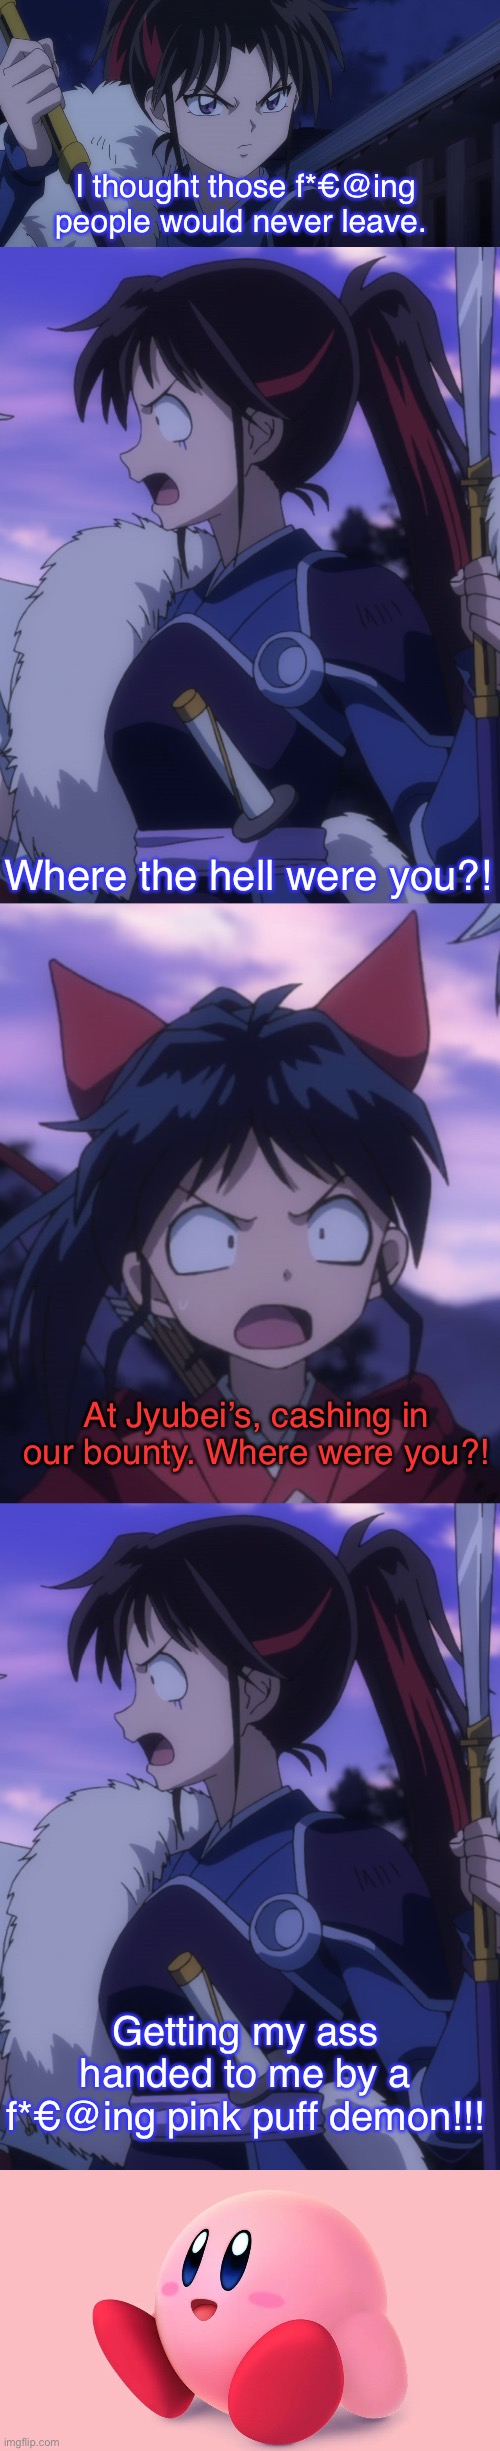 Setsuna got her ass handed to her | I thought those f*€@ing people would never leave. Where the hell were you?! At Jyubei’s, cashing in our bounty. Where were you?! Getting my ass handed to me by a f*€@ing pink puff demon!!! | image tagged in inuyasha,yashahime,venture bros,kirby,crossover,reference | made w/ Imgflip meme maker